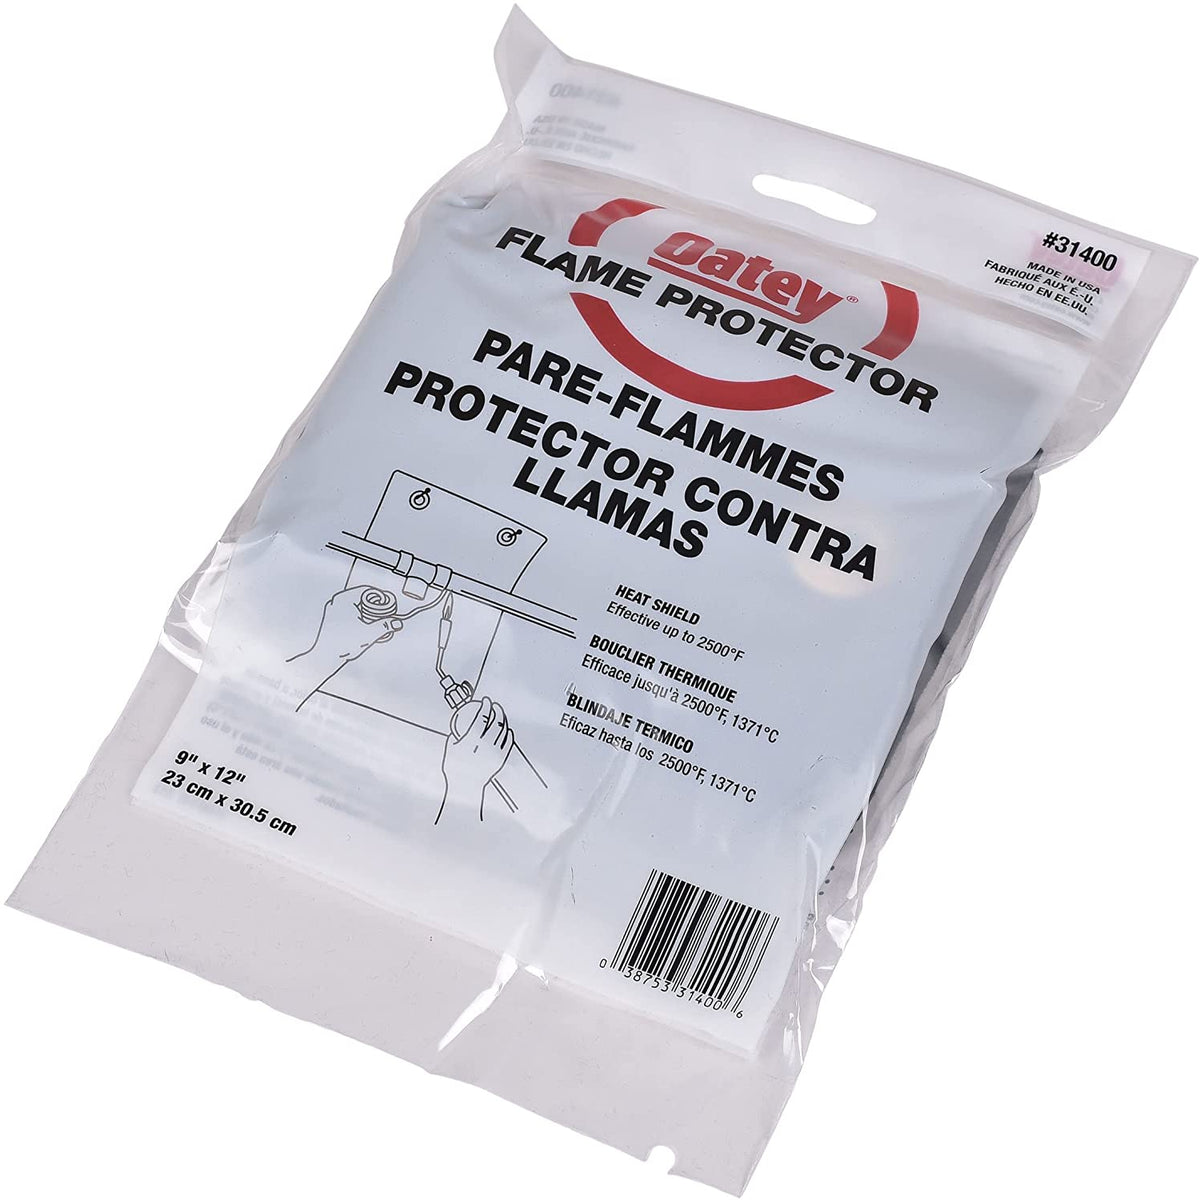 Oatey 31400 Flame Protector, 9" x 12"